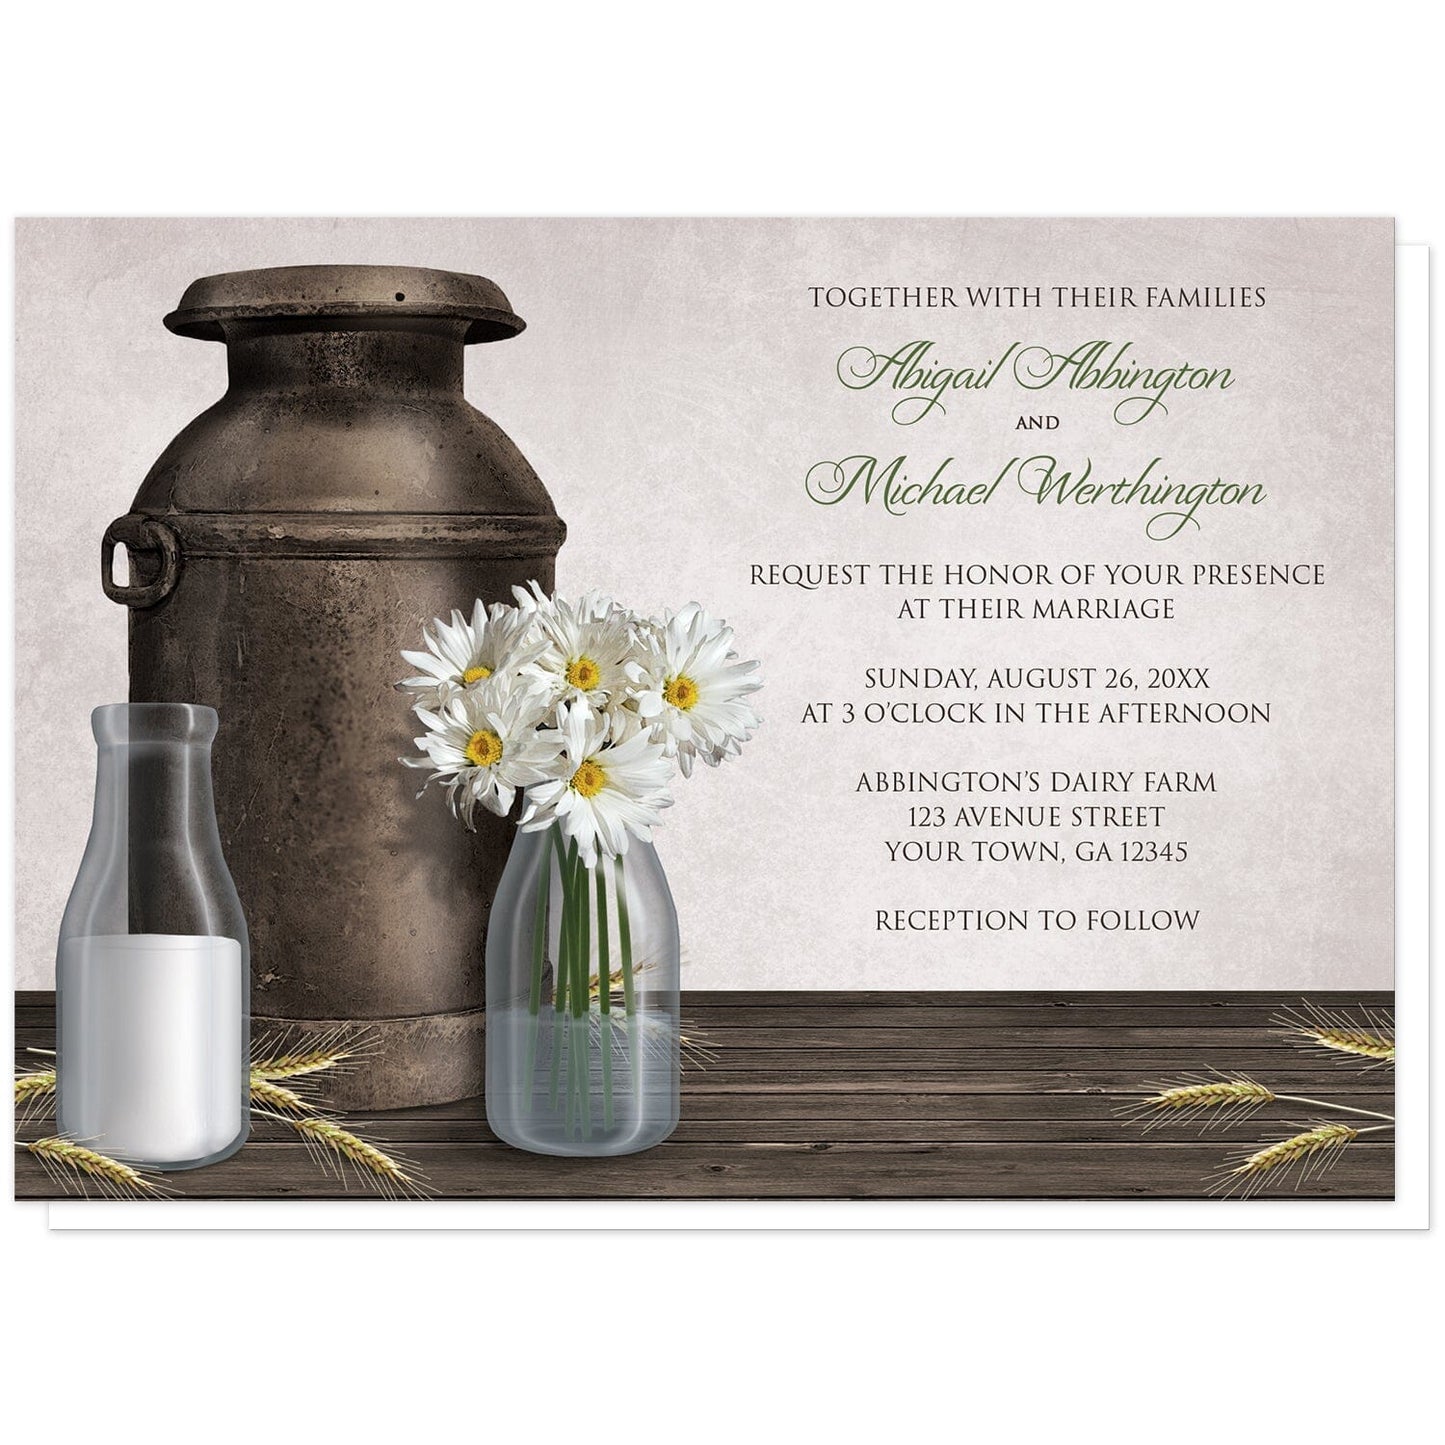 Rustic Country Dairy Farm Wedding Invitations at Artistically Invited. Rustic country dairy farm wedding invitations with an illustration of an antique milk can, two milk bottles (one with milk, the other with white daisies and water) on a dark wood tabletop with hay stems. Your personalized marriage celebration details are custom printed in brown and green over a light parchment-colored background.